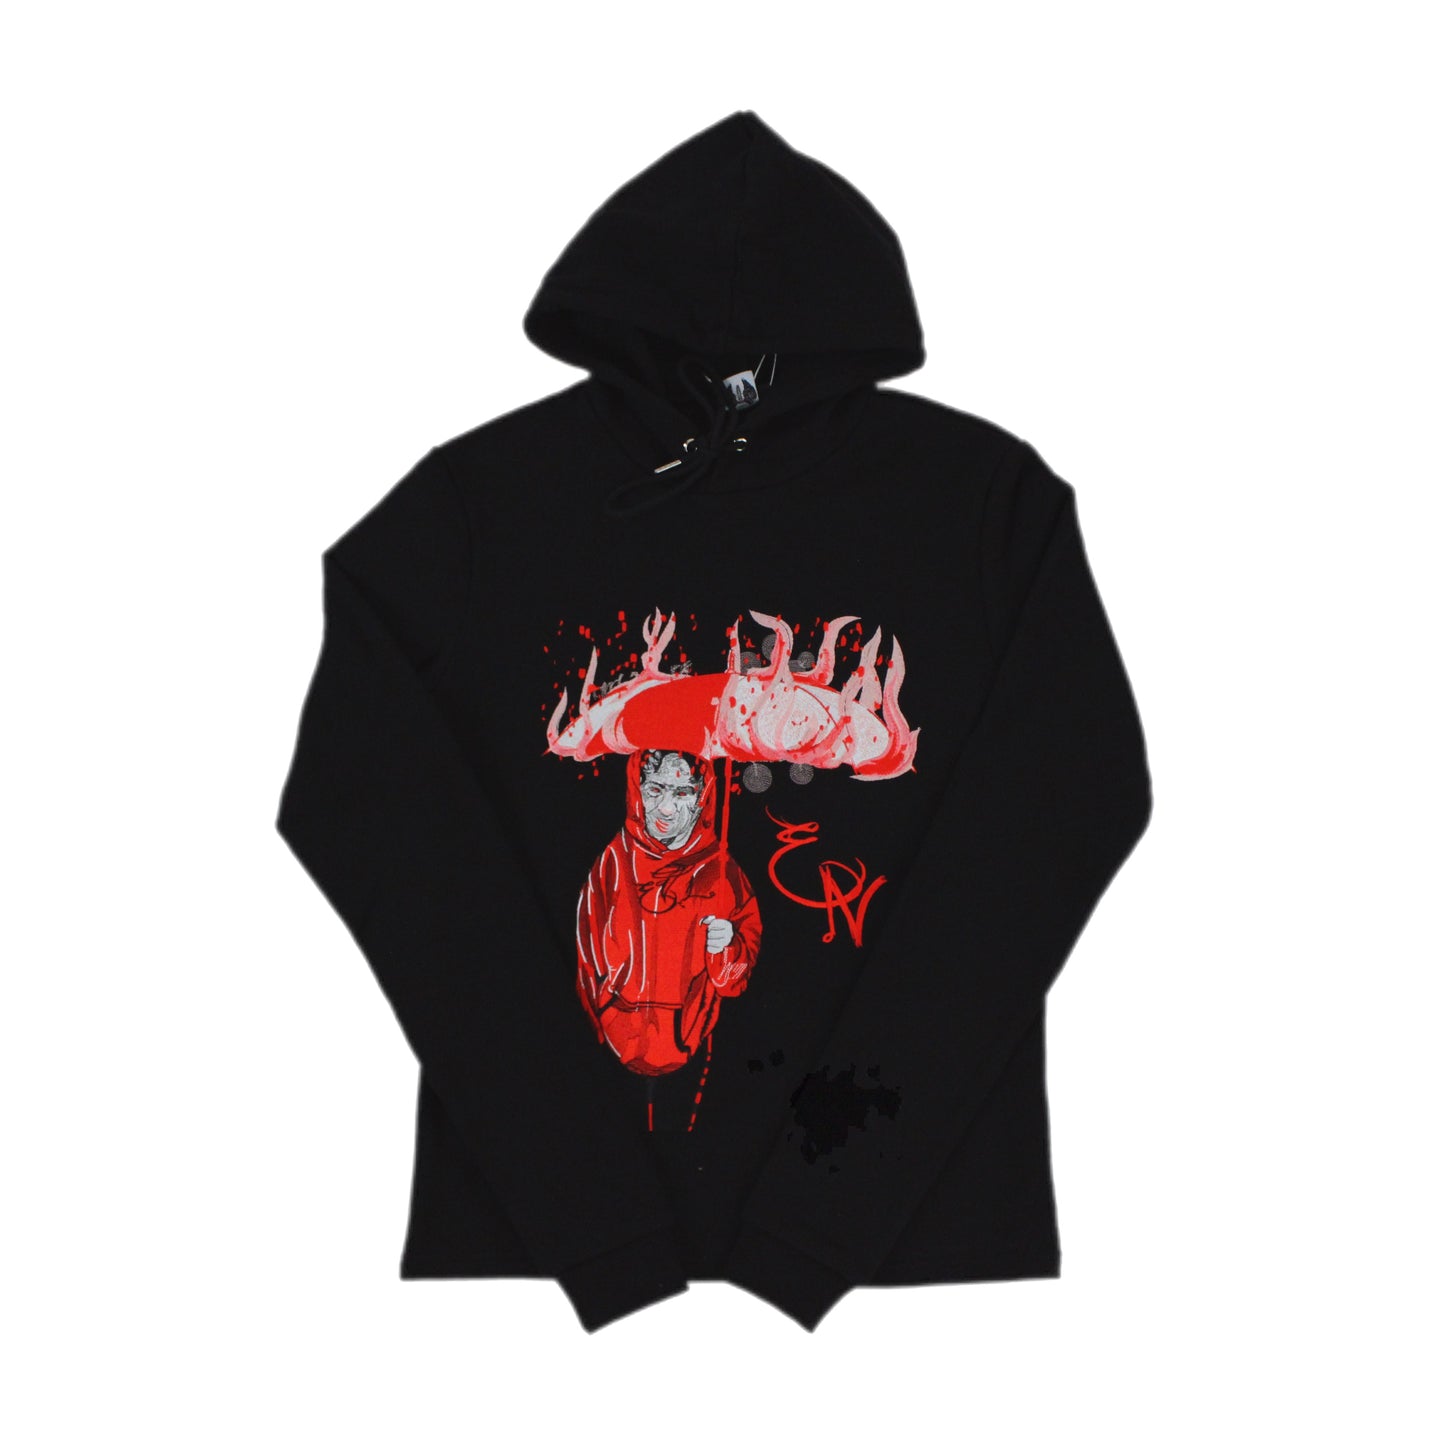 EVOL NIGHTS Trapped Soul Hoodie Black and Red